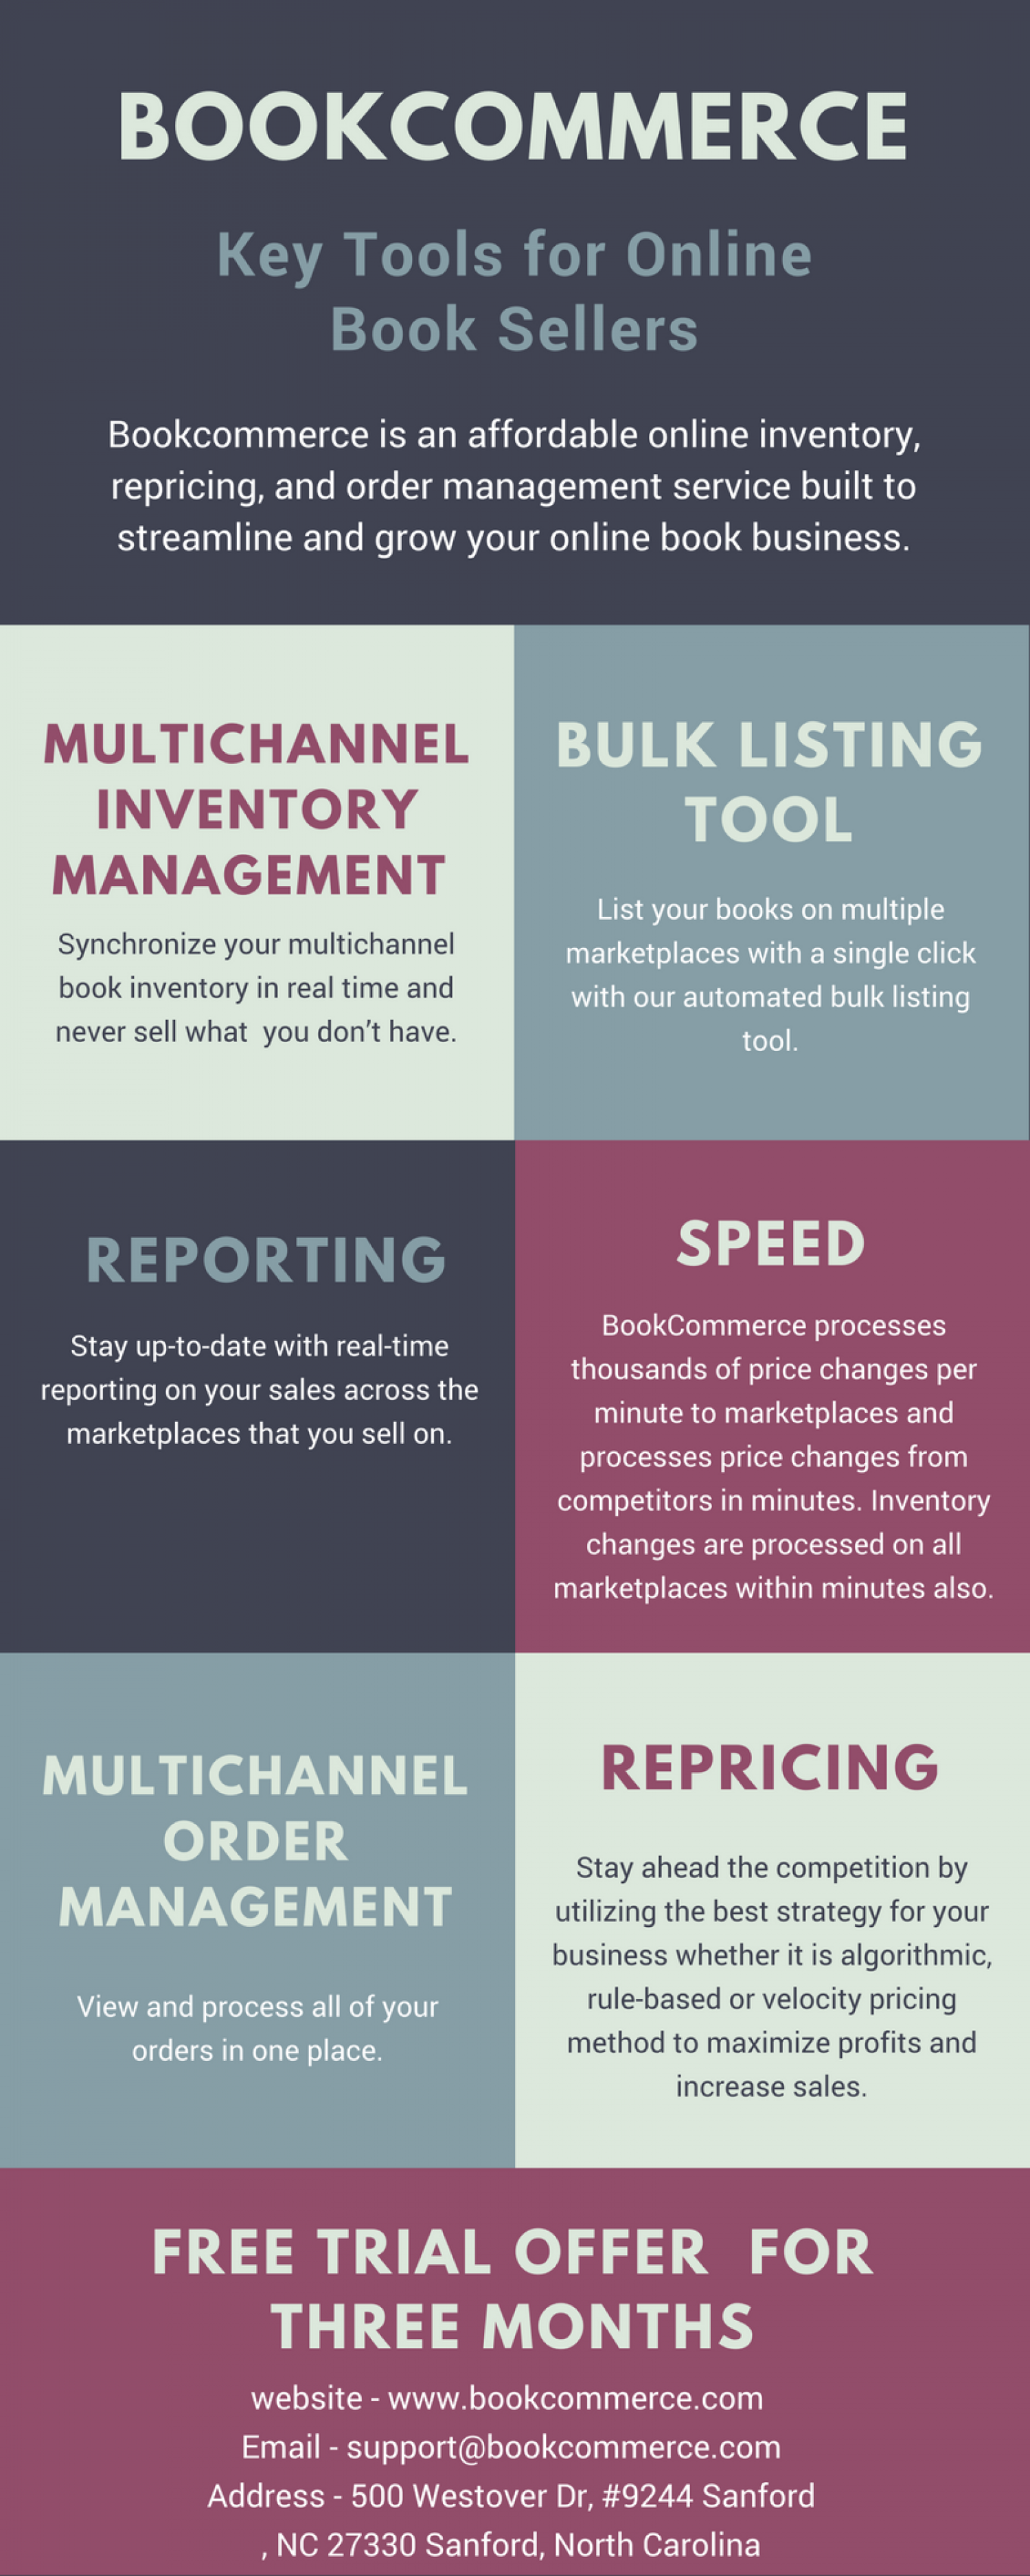 Bookcommerce | key tools for online book sellers Infographic